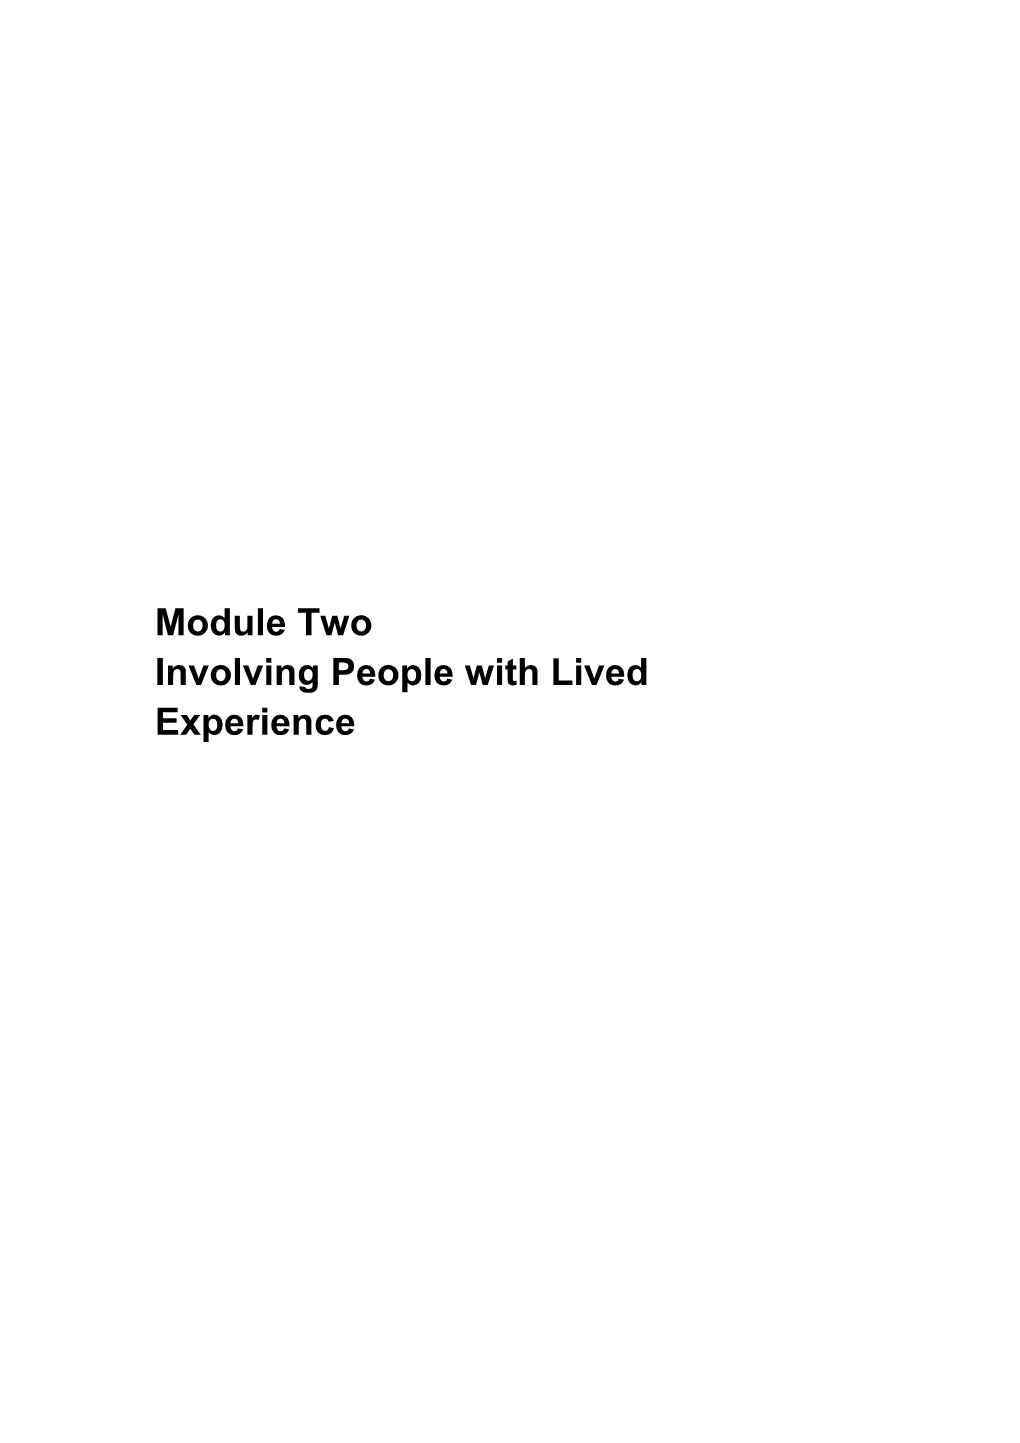 Module Two Involving People with Lived Experience